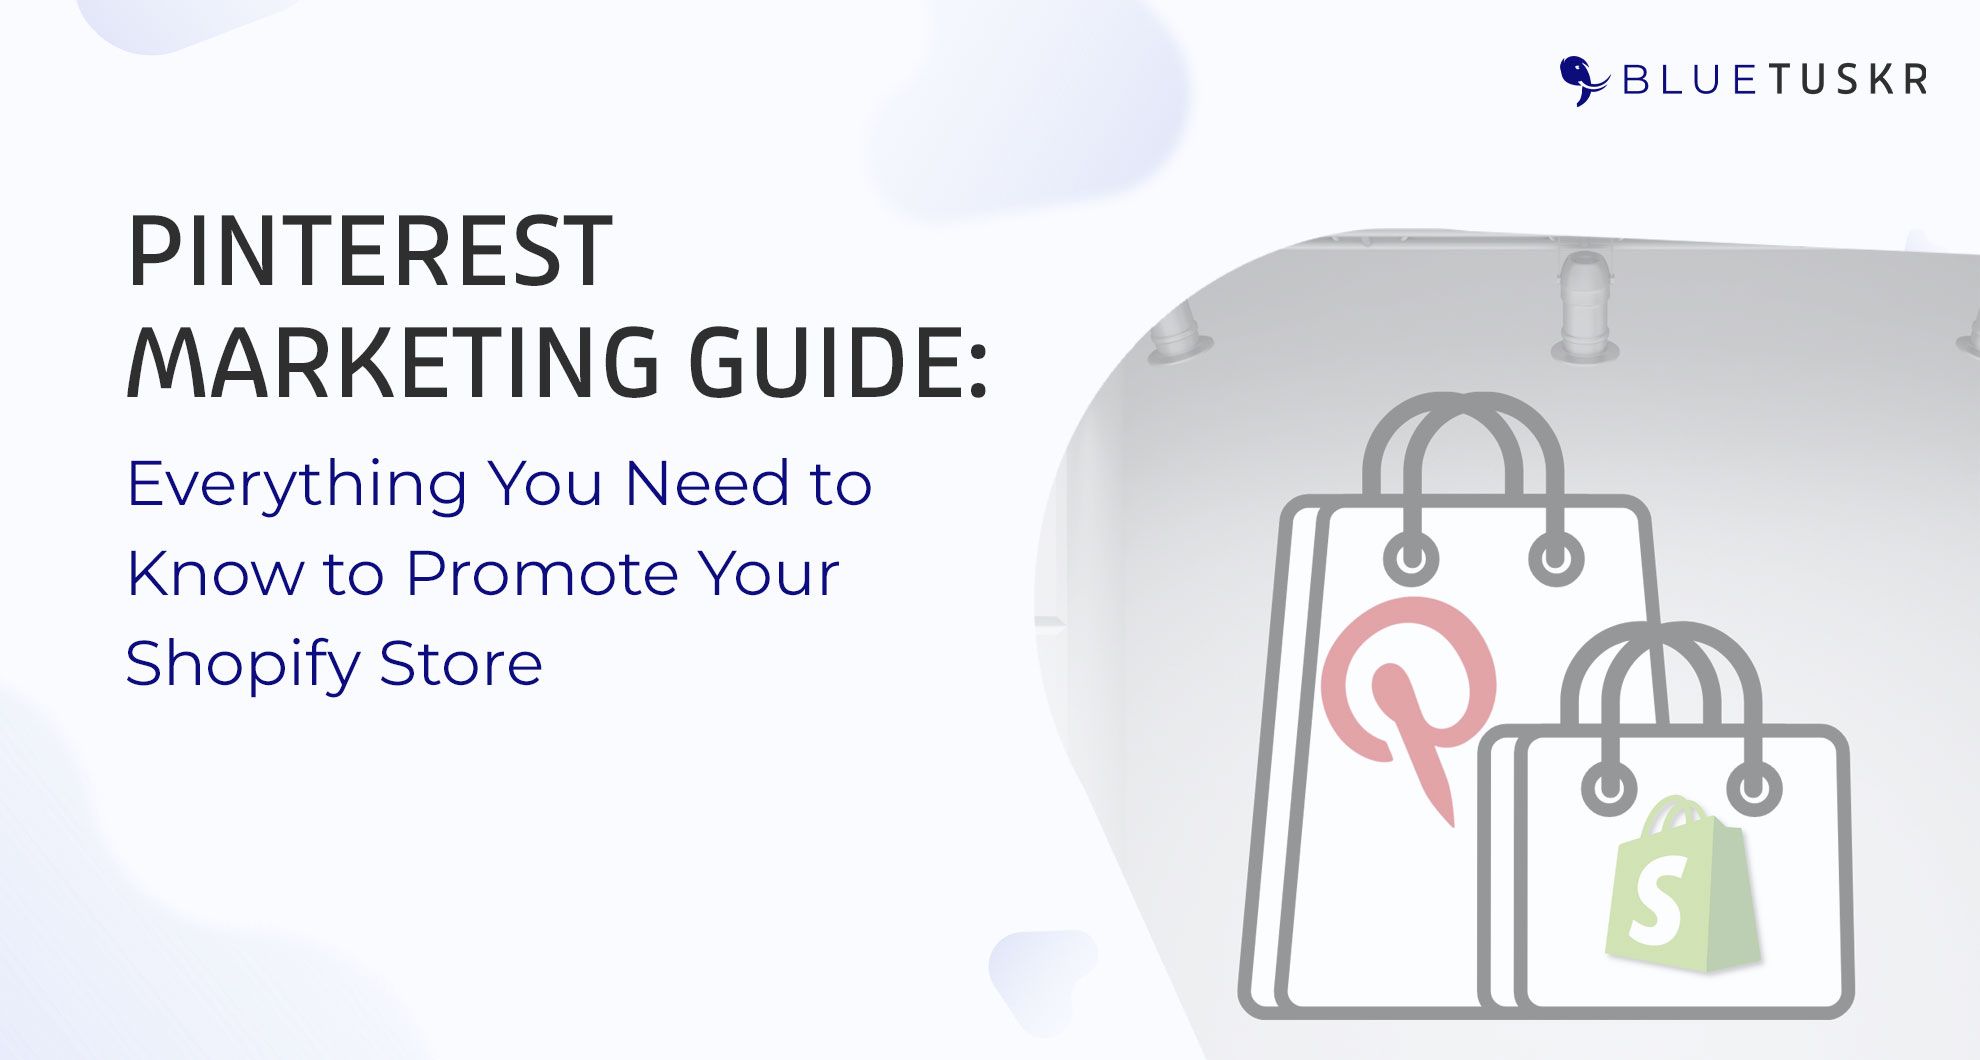 Pinterest Marketing Guide: Everything You Need to Know to Promote Your Shopify Store